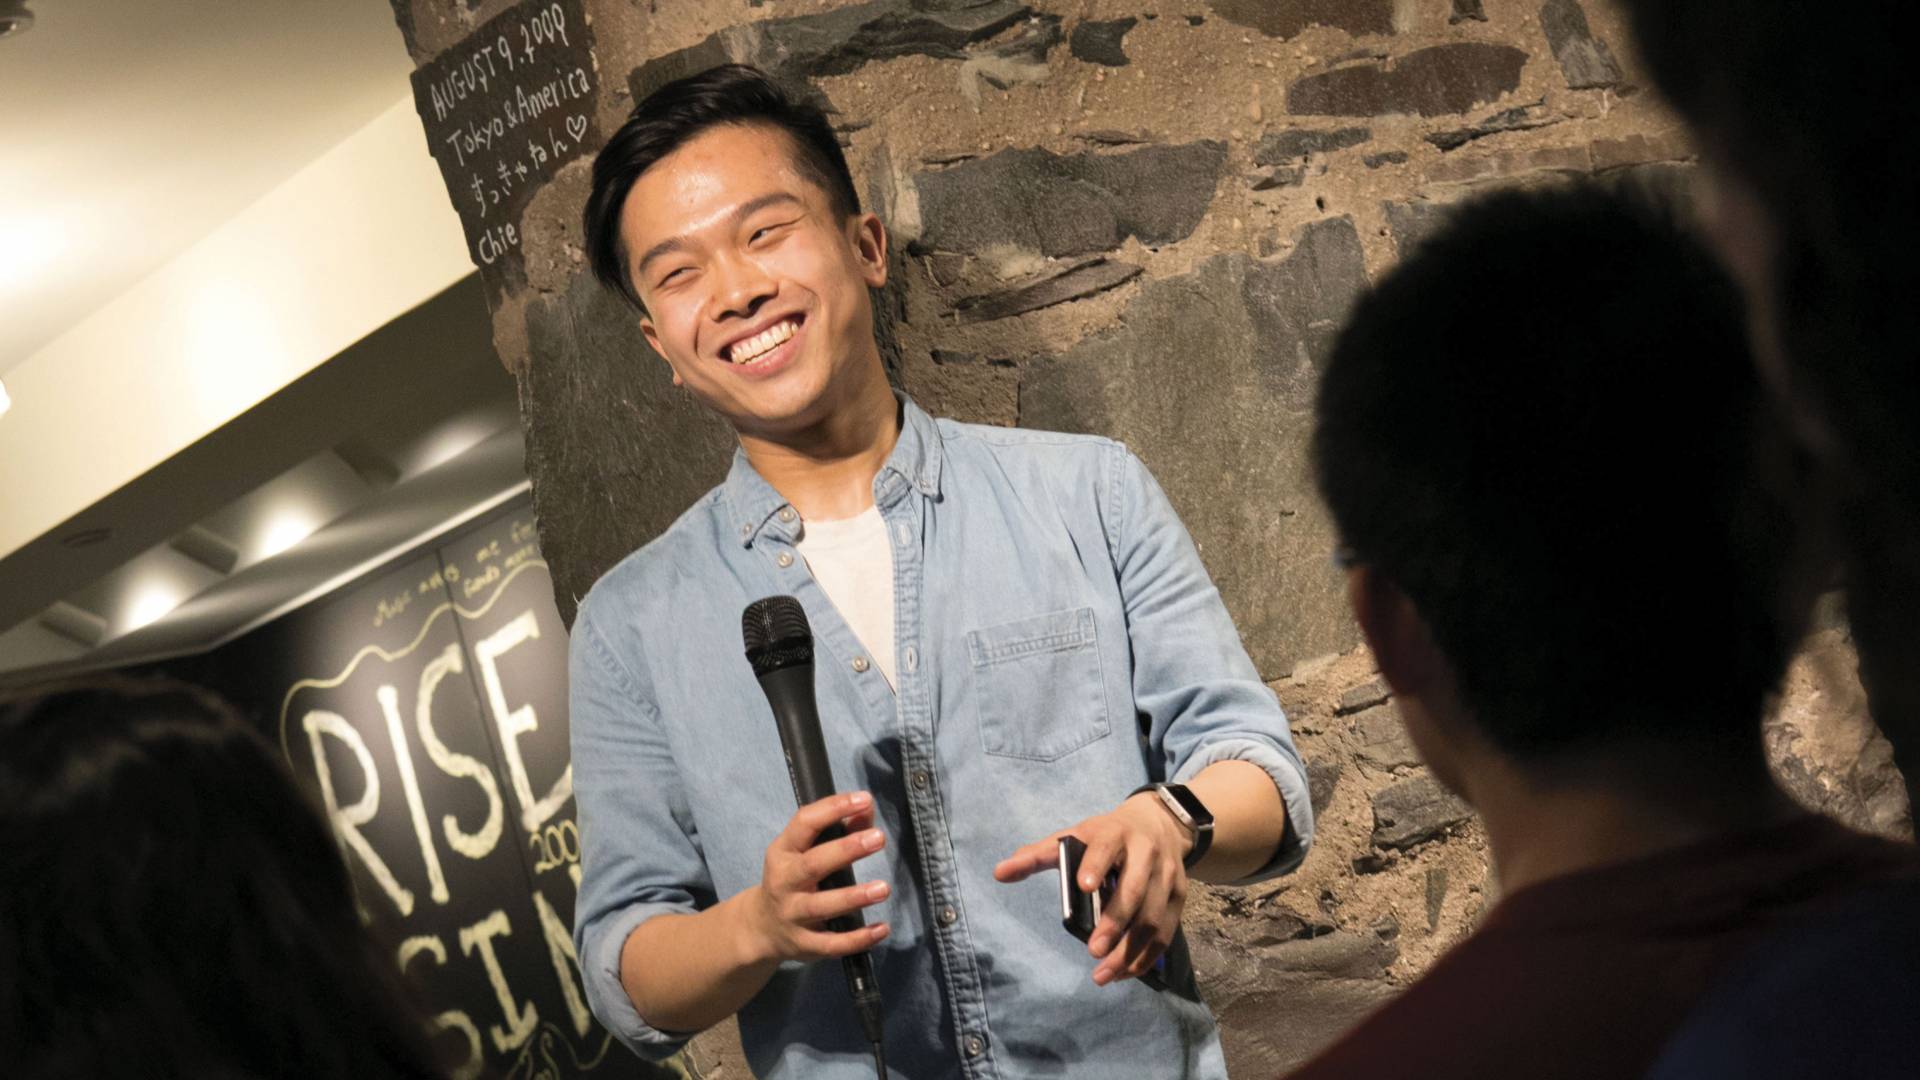 Edric Huang performing at slam poetry event